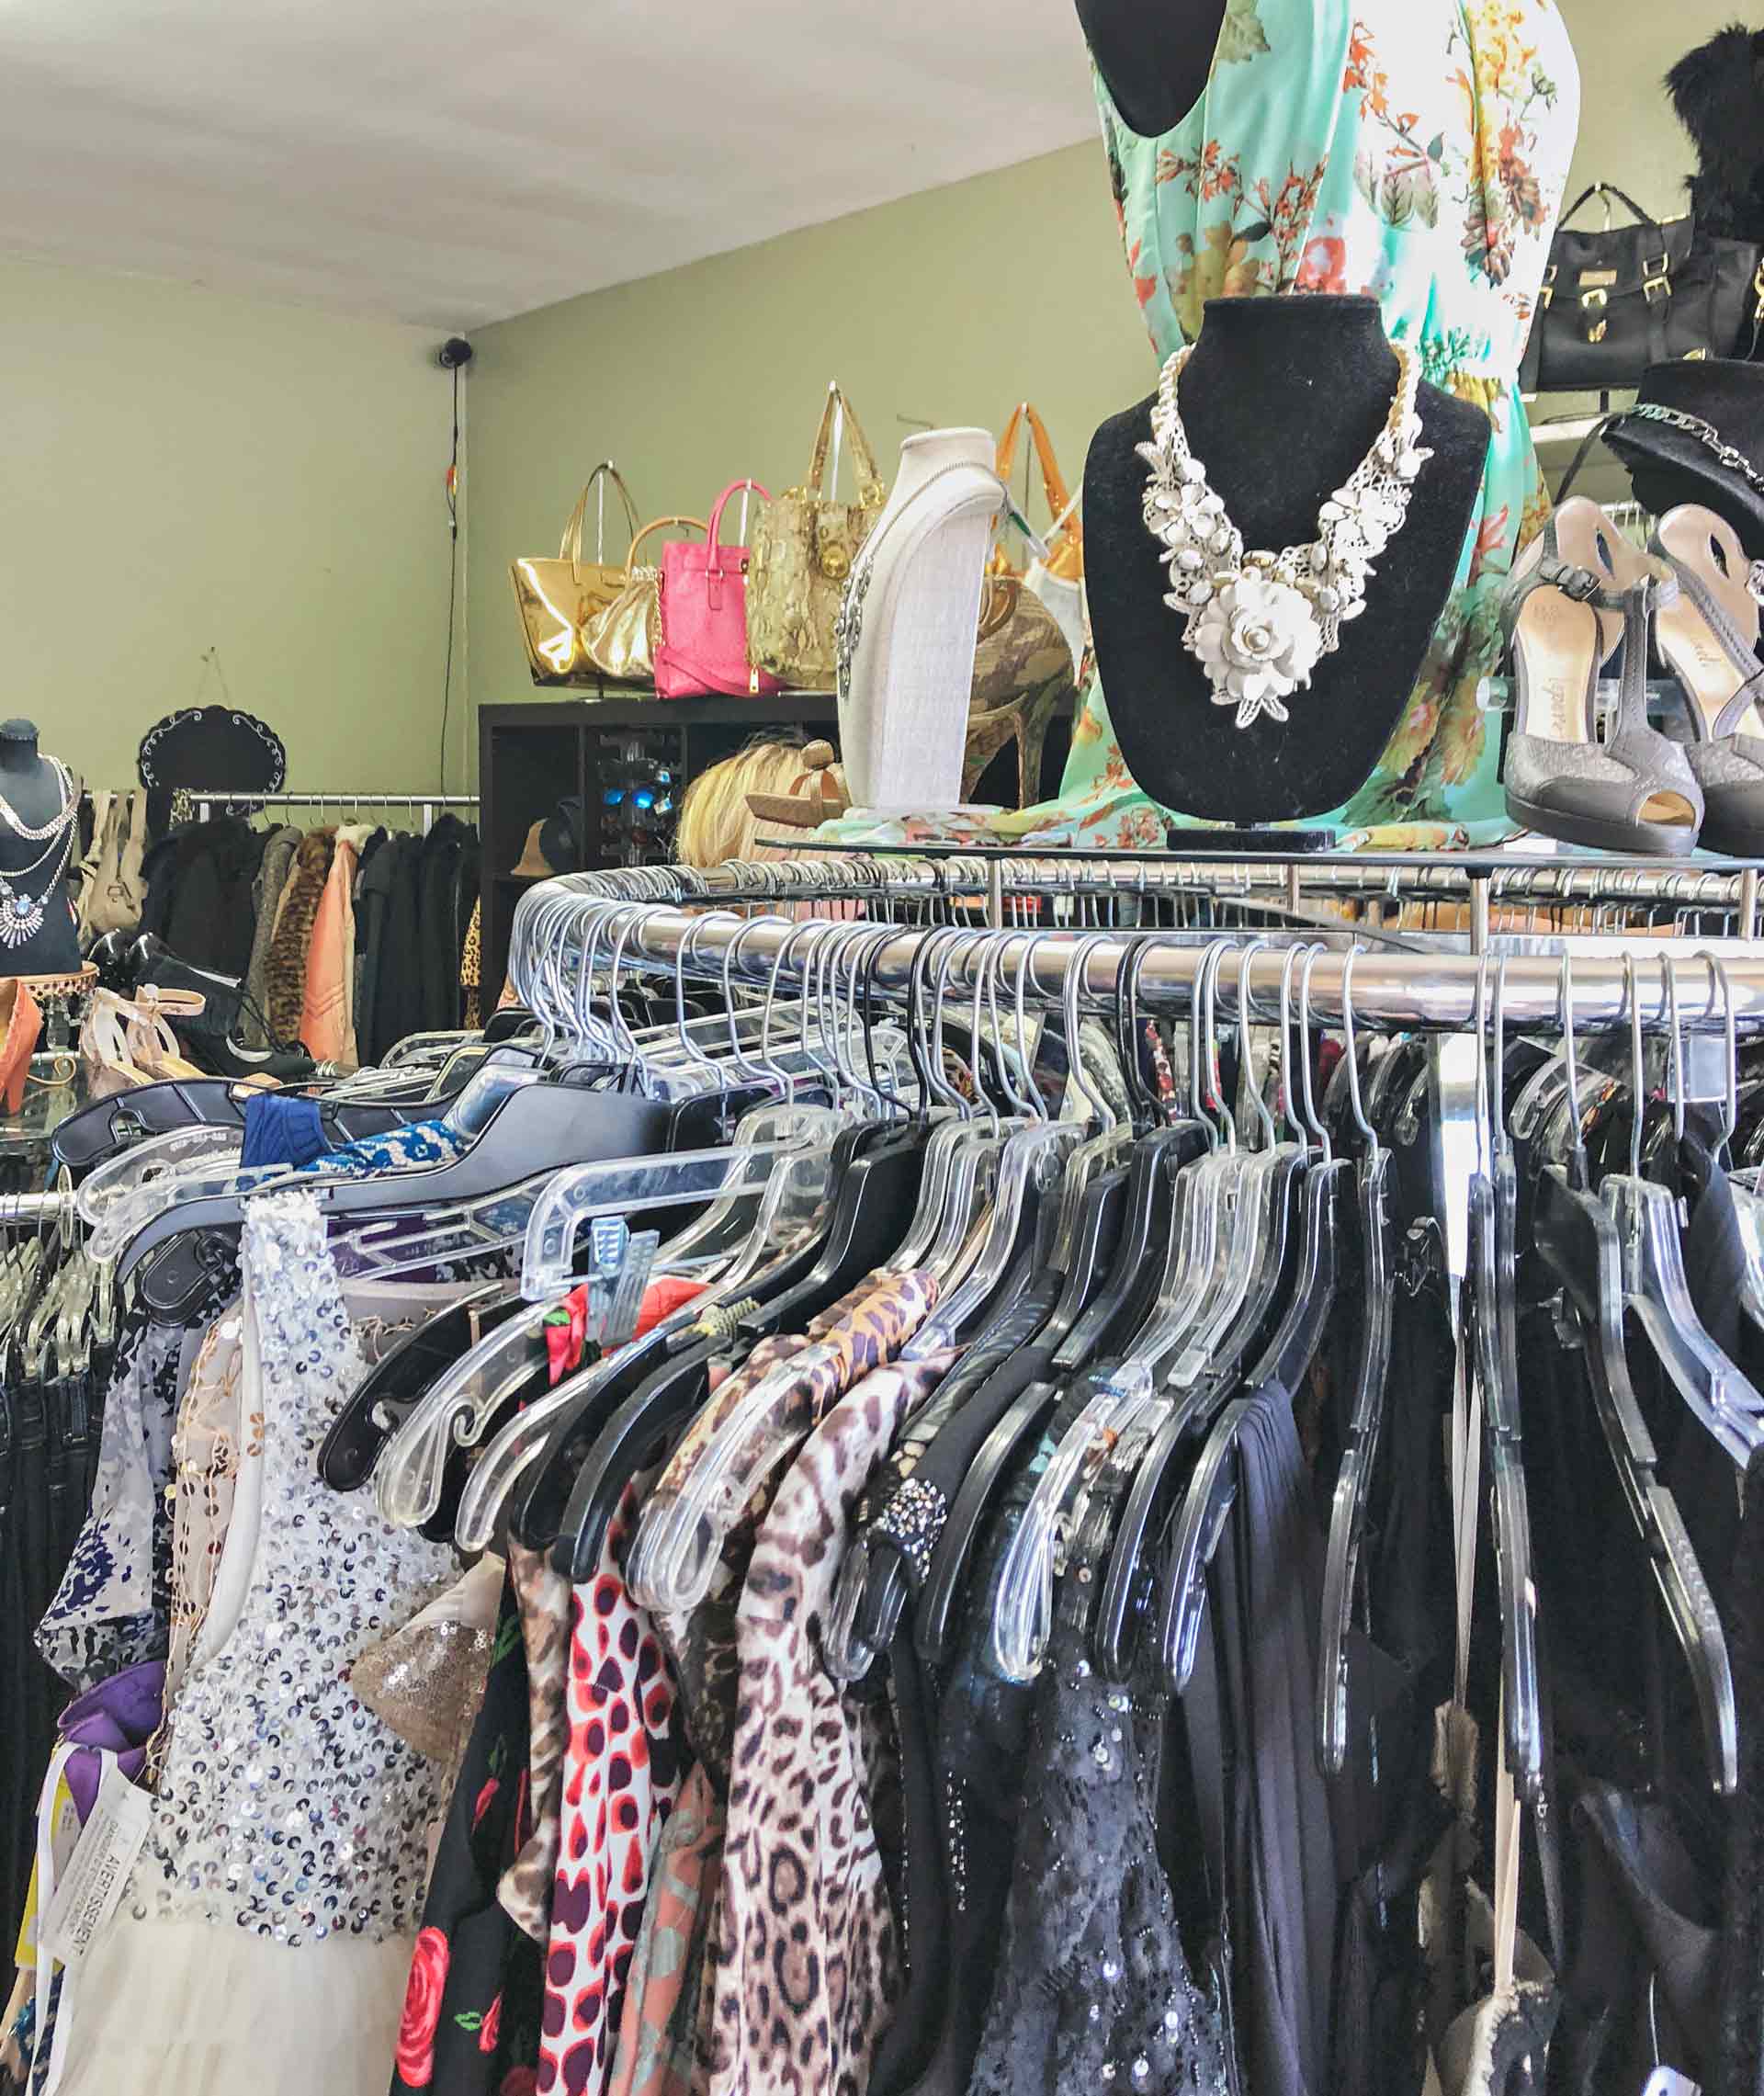 secondhand shopping, thrifting, local thrift shops, burbank thrift shops, reclaimed vintage